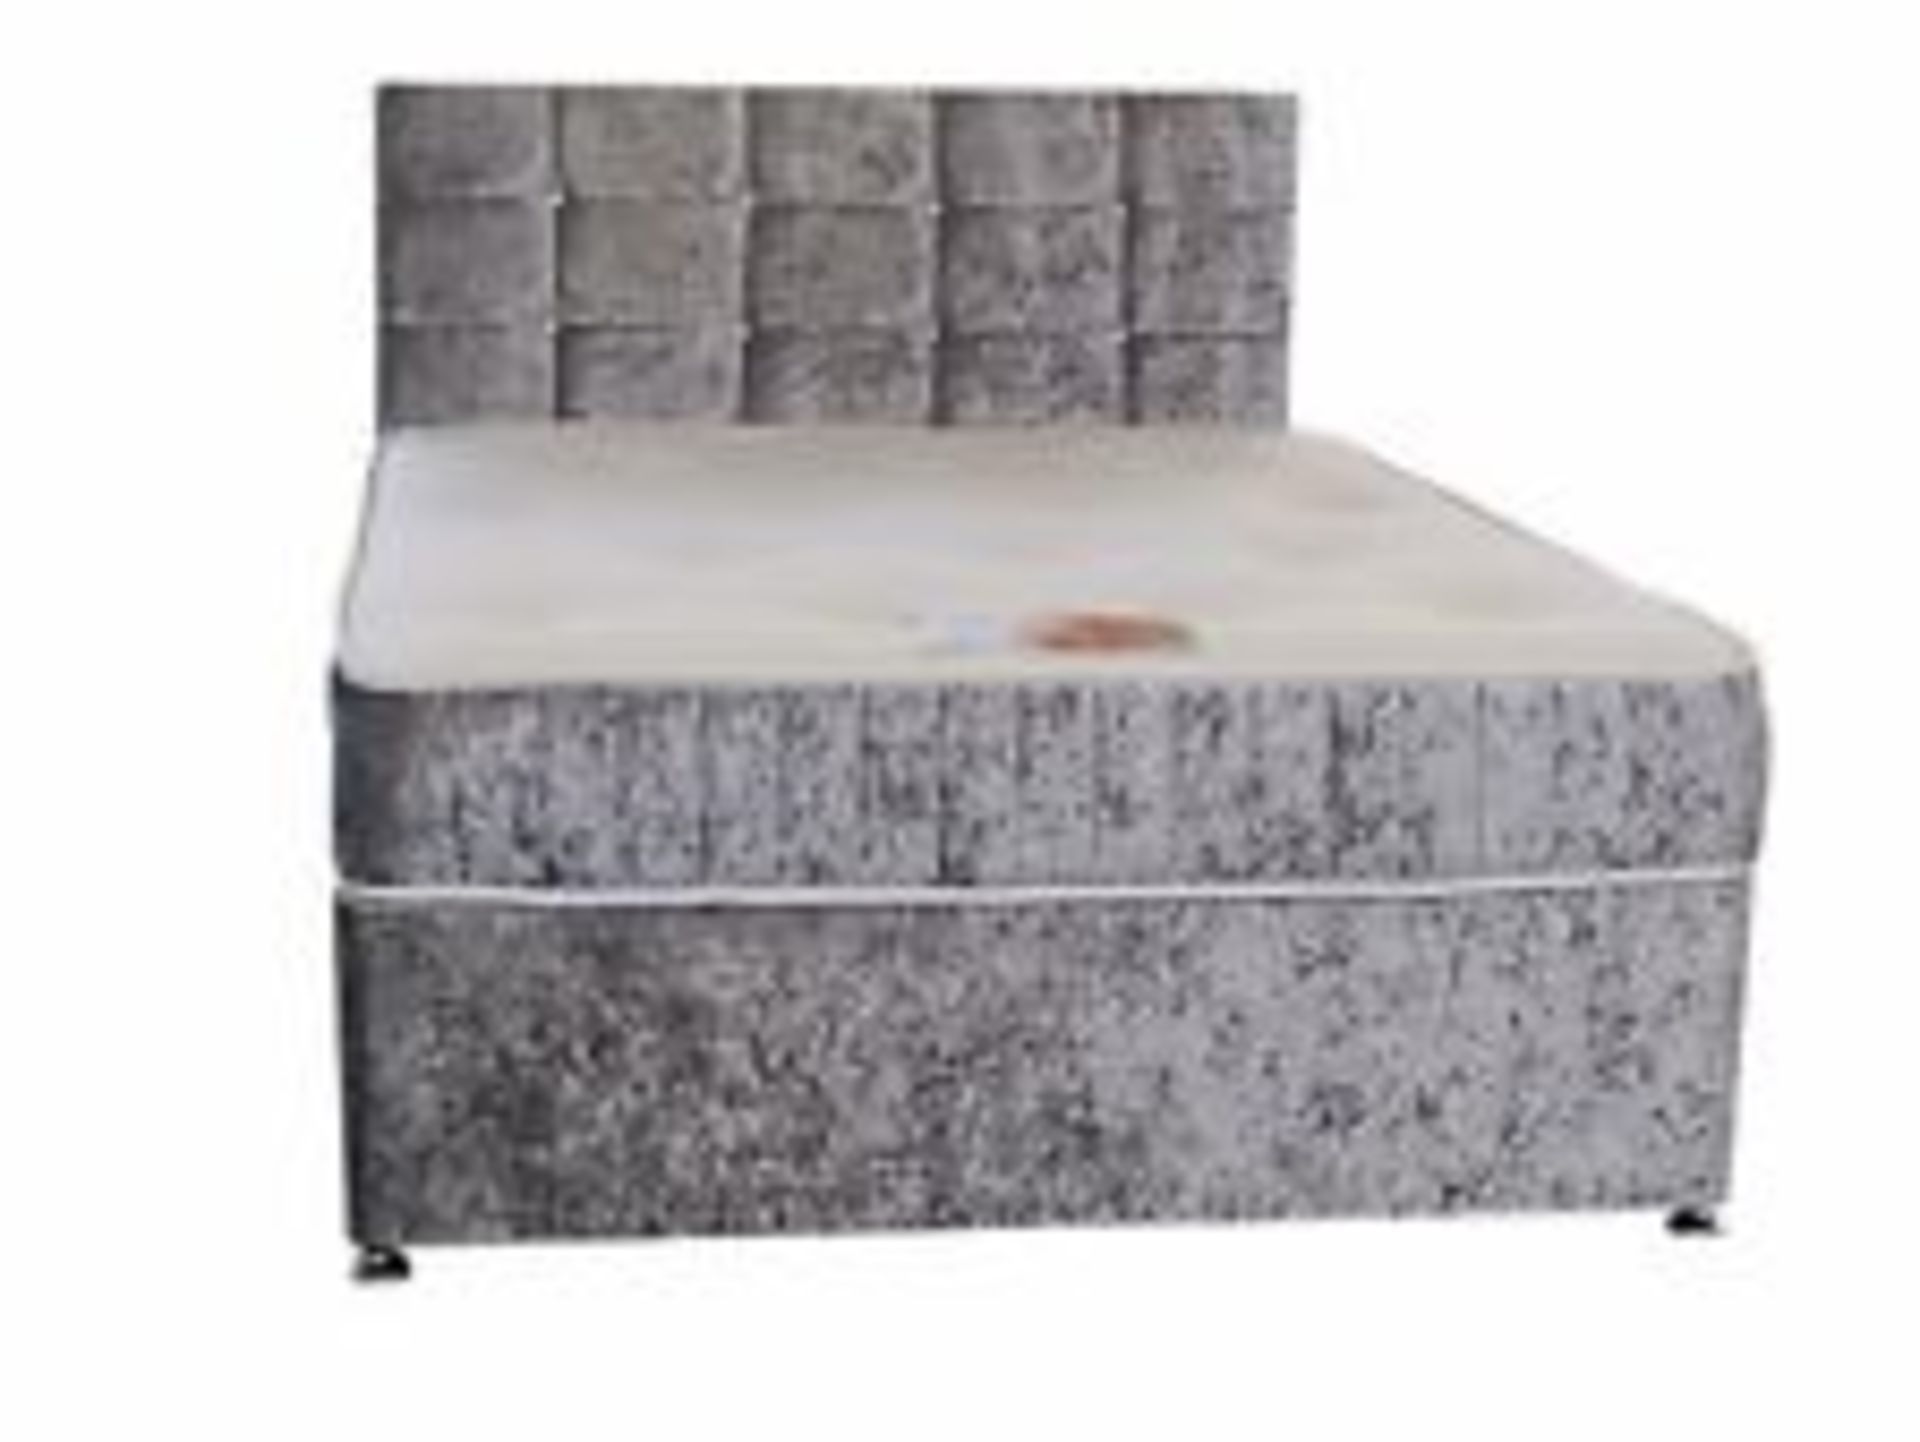 4ft 6" (Double) luxury pocket sprung with memory foam double bed and matching headboard